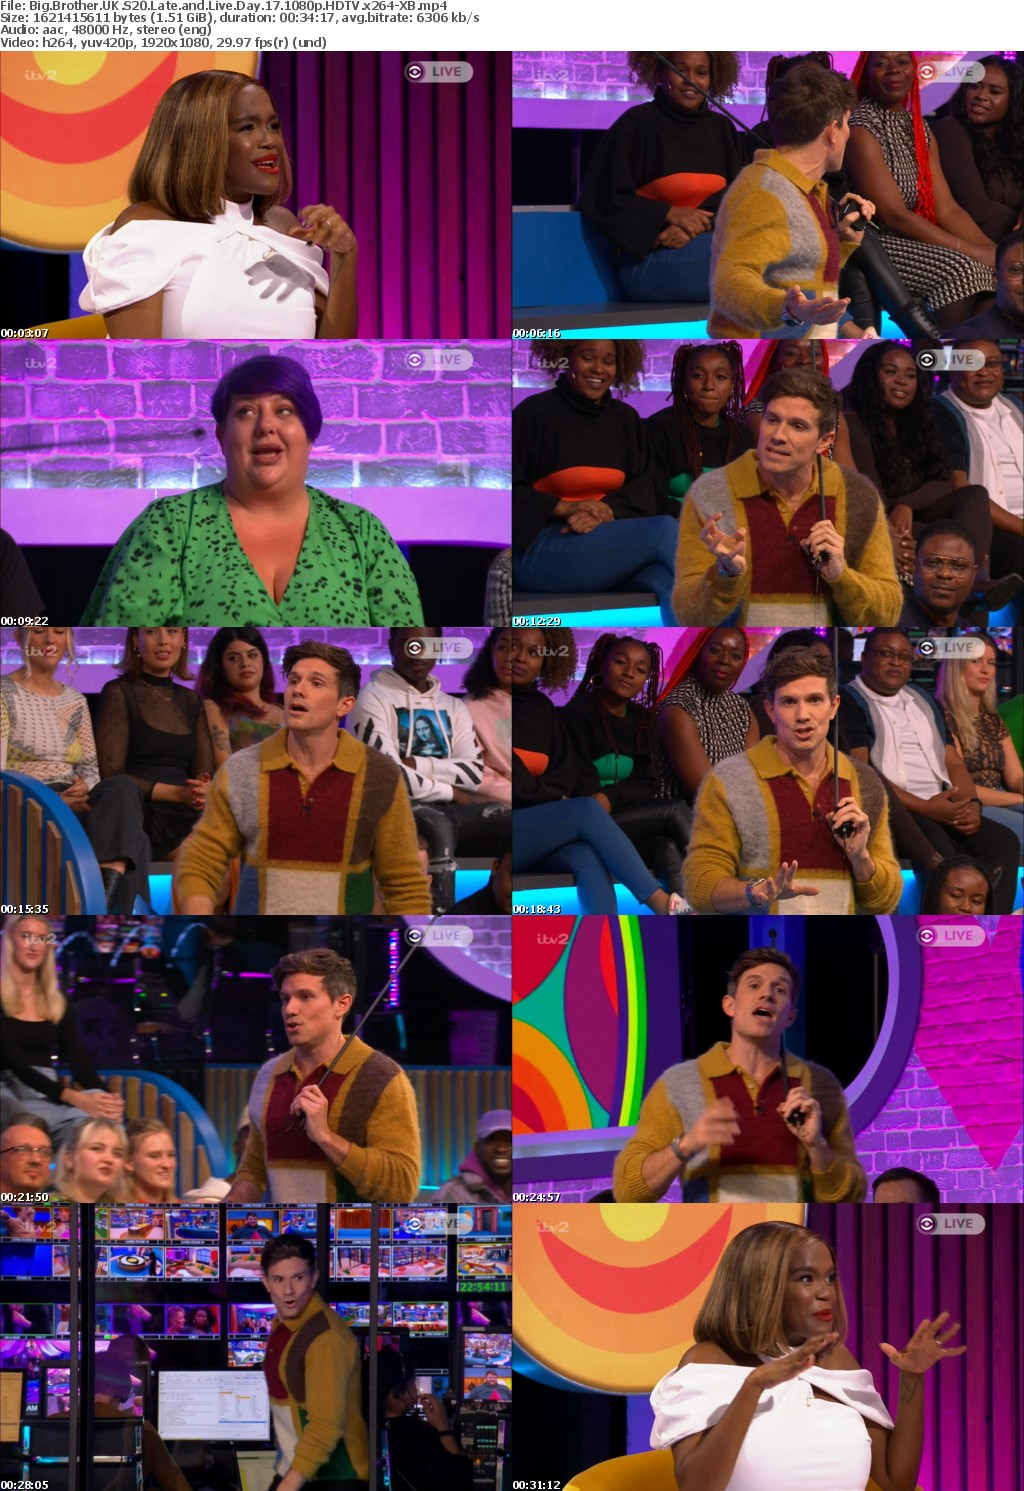 Big Brother UK S20 Late and Live Day 17 1080p HDTV x264-XB